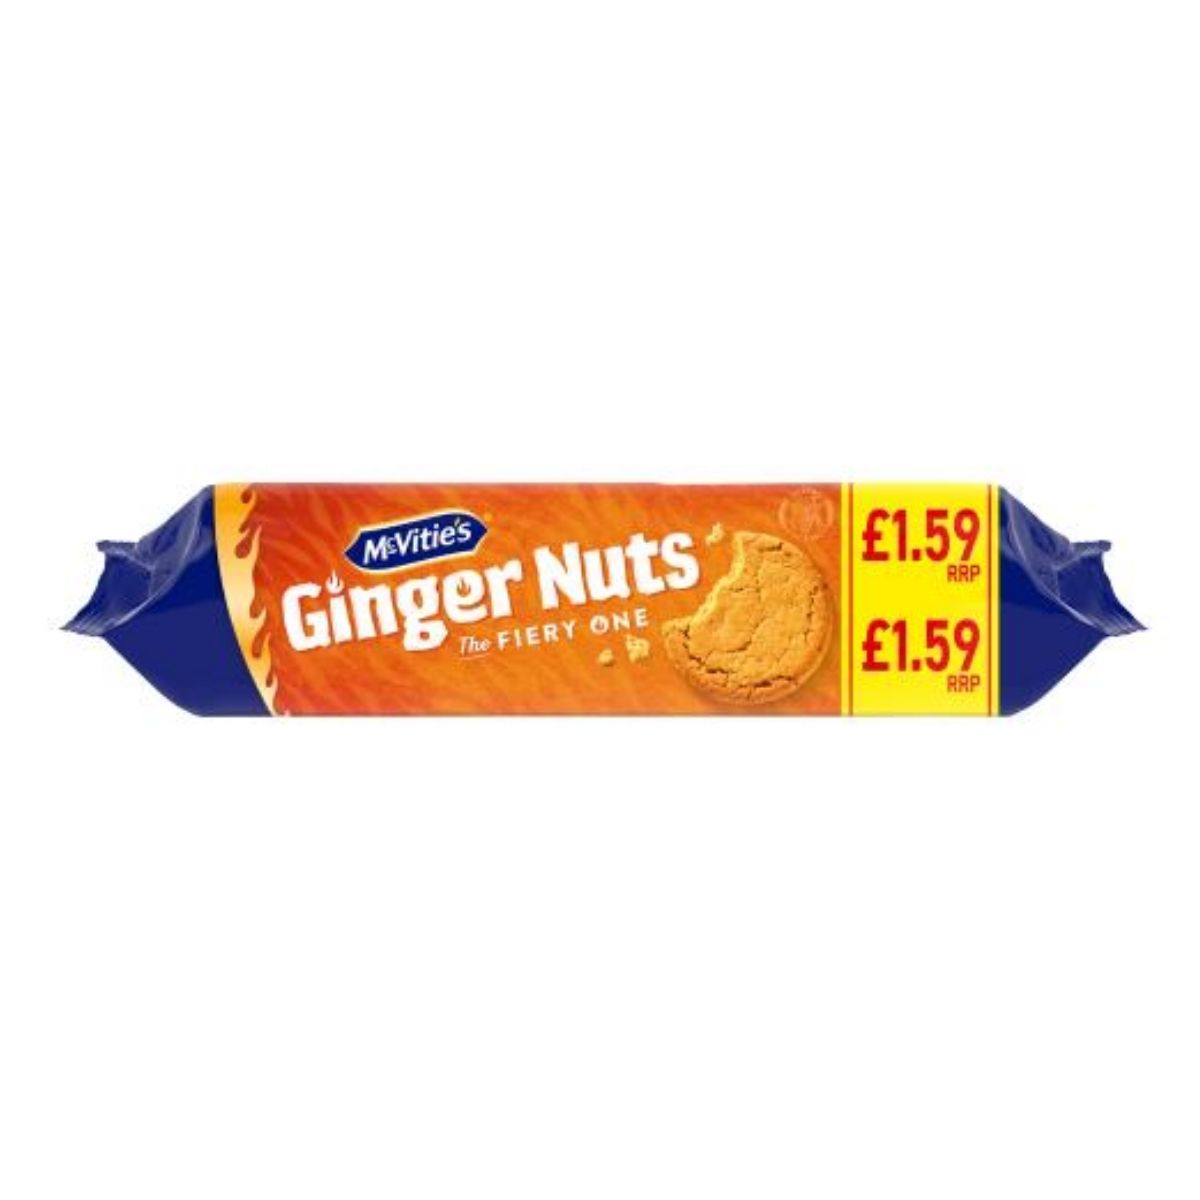 McVities - Ginger Nuts - 250g on a white background.